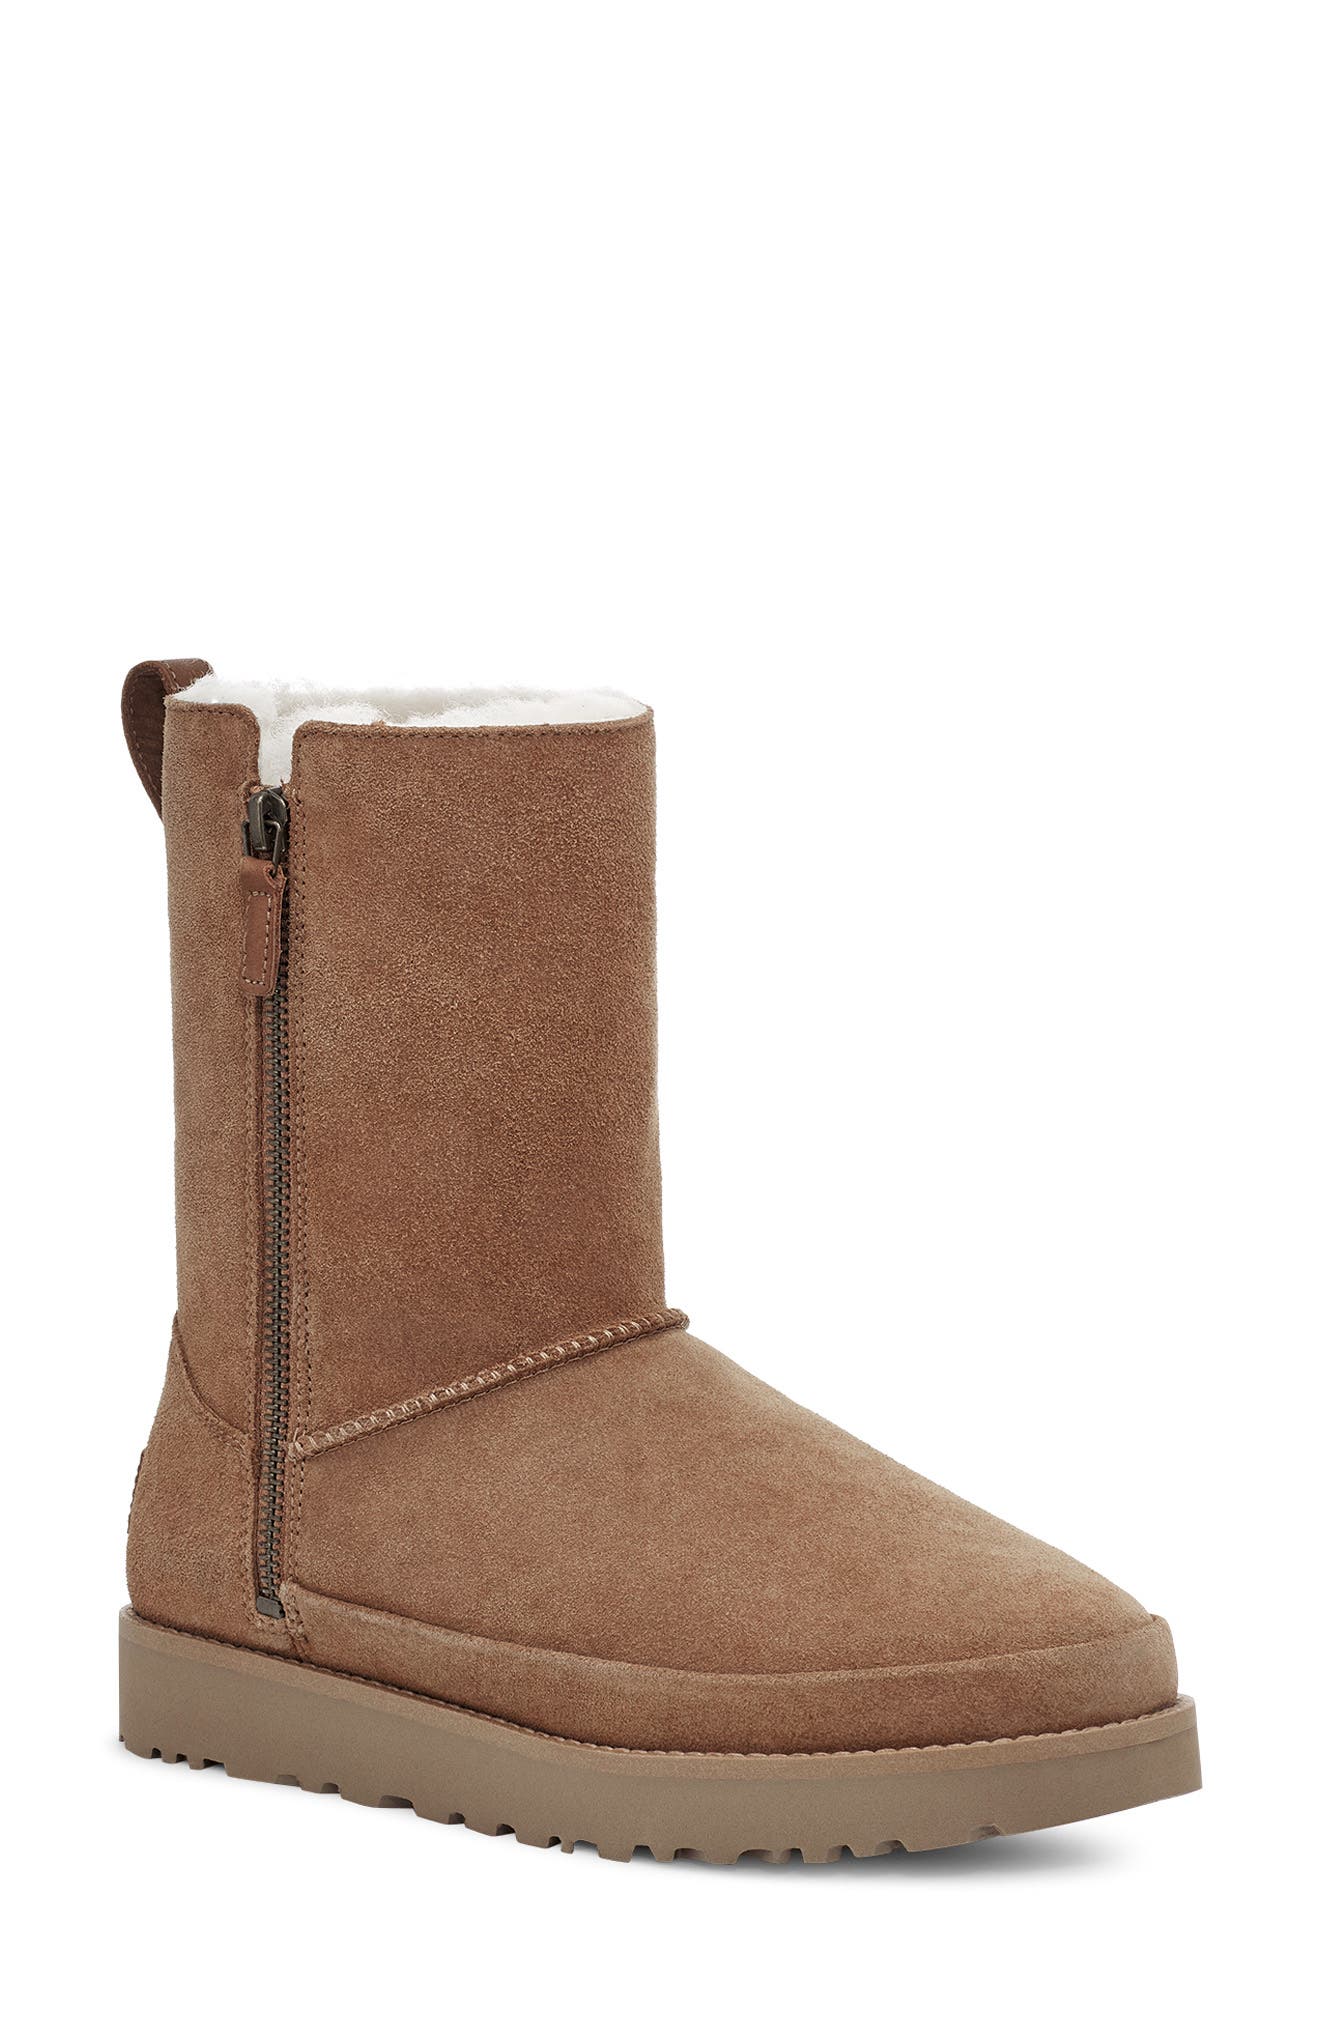 nordstrom uggs cyber monday